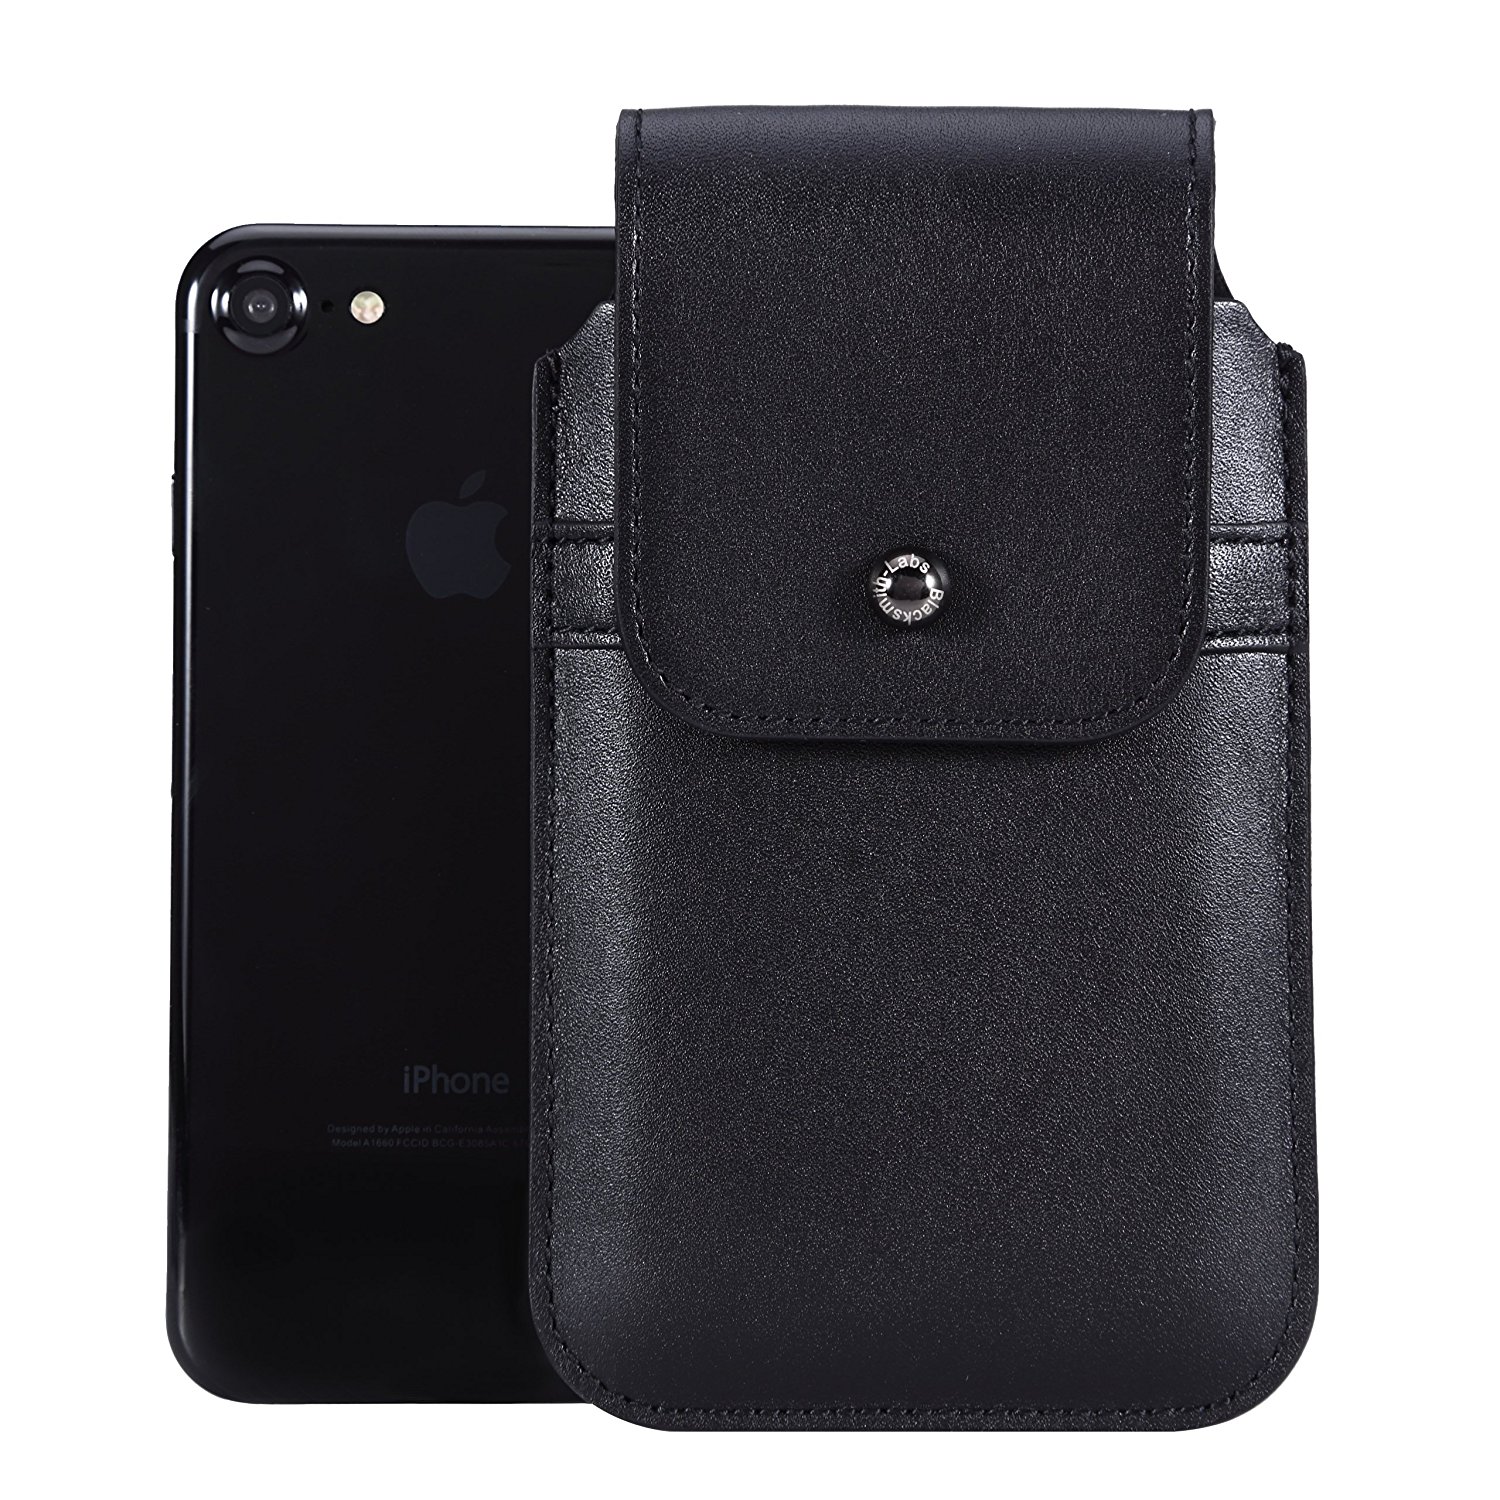 Blacksmith-Labs Holster Case for iPhone 6; iPhone 6s, iPhone 7 - Black